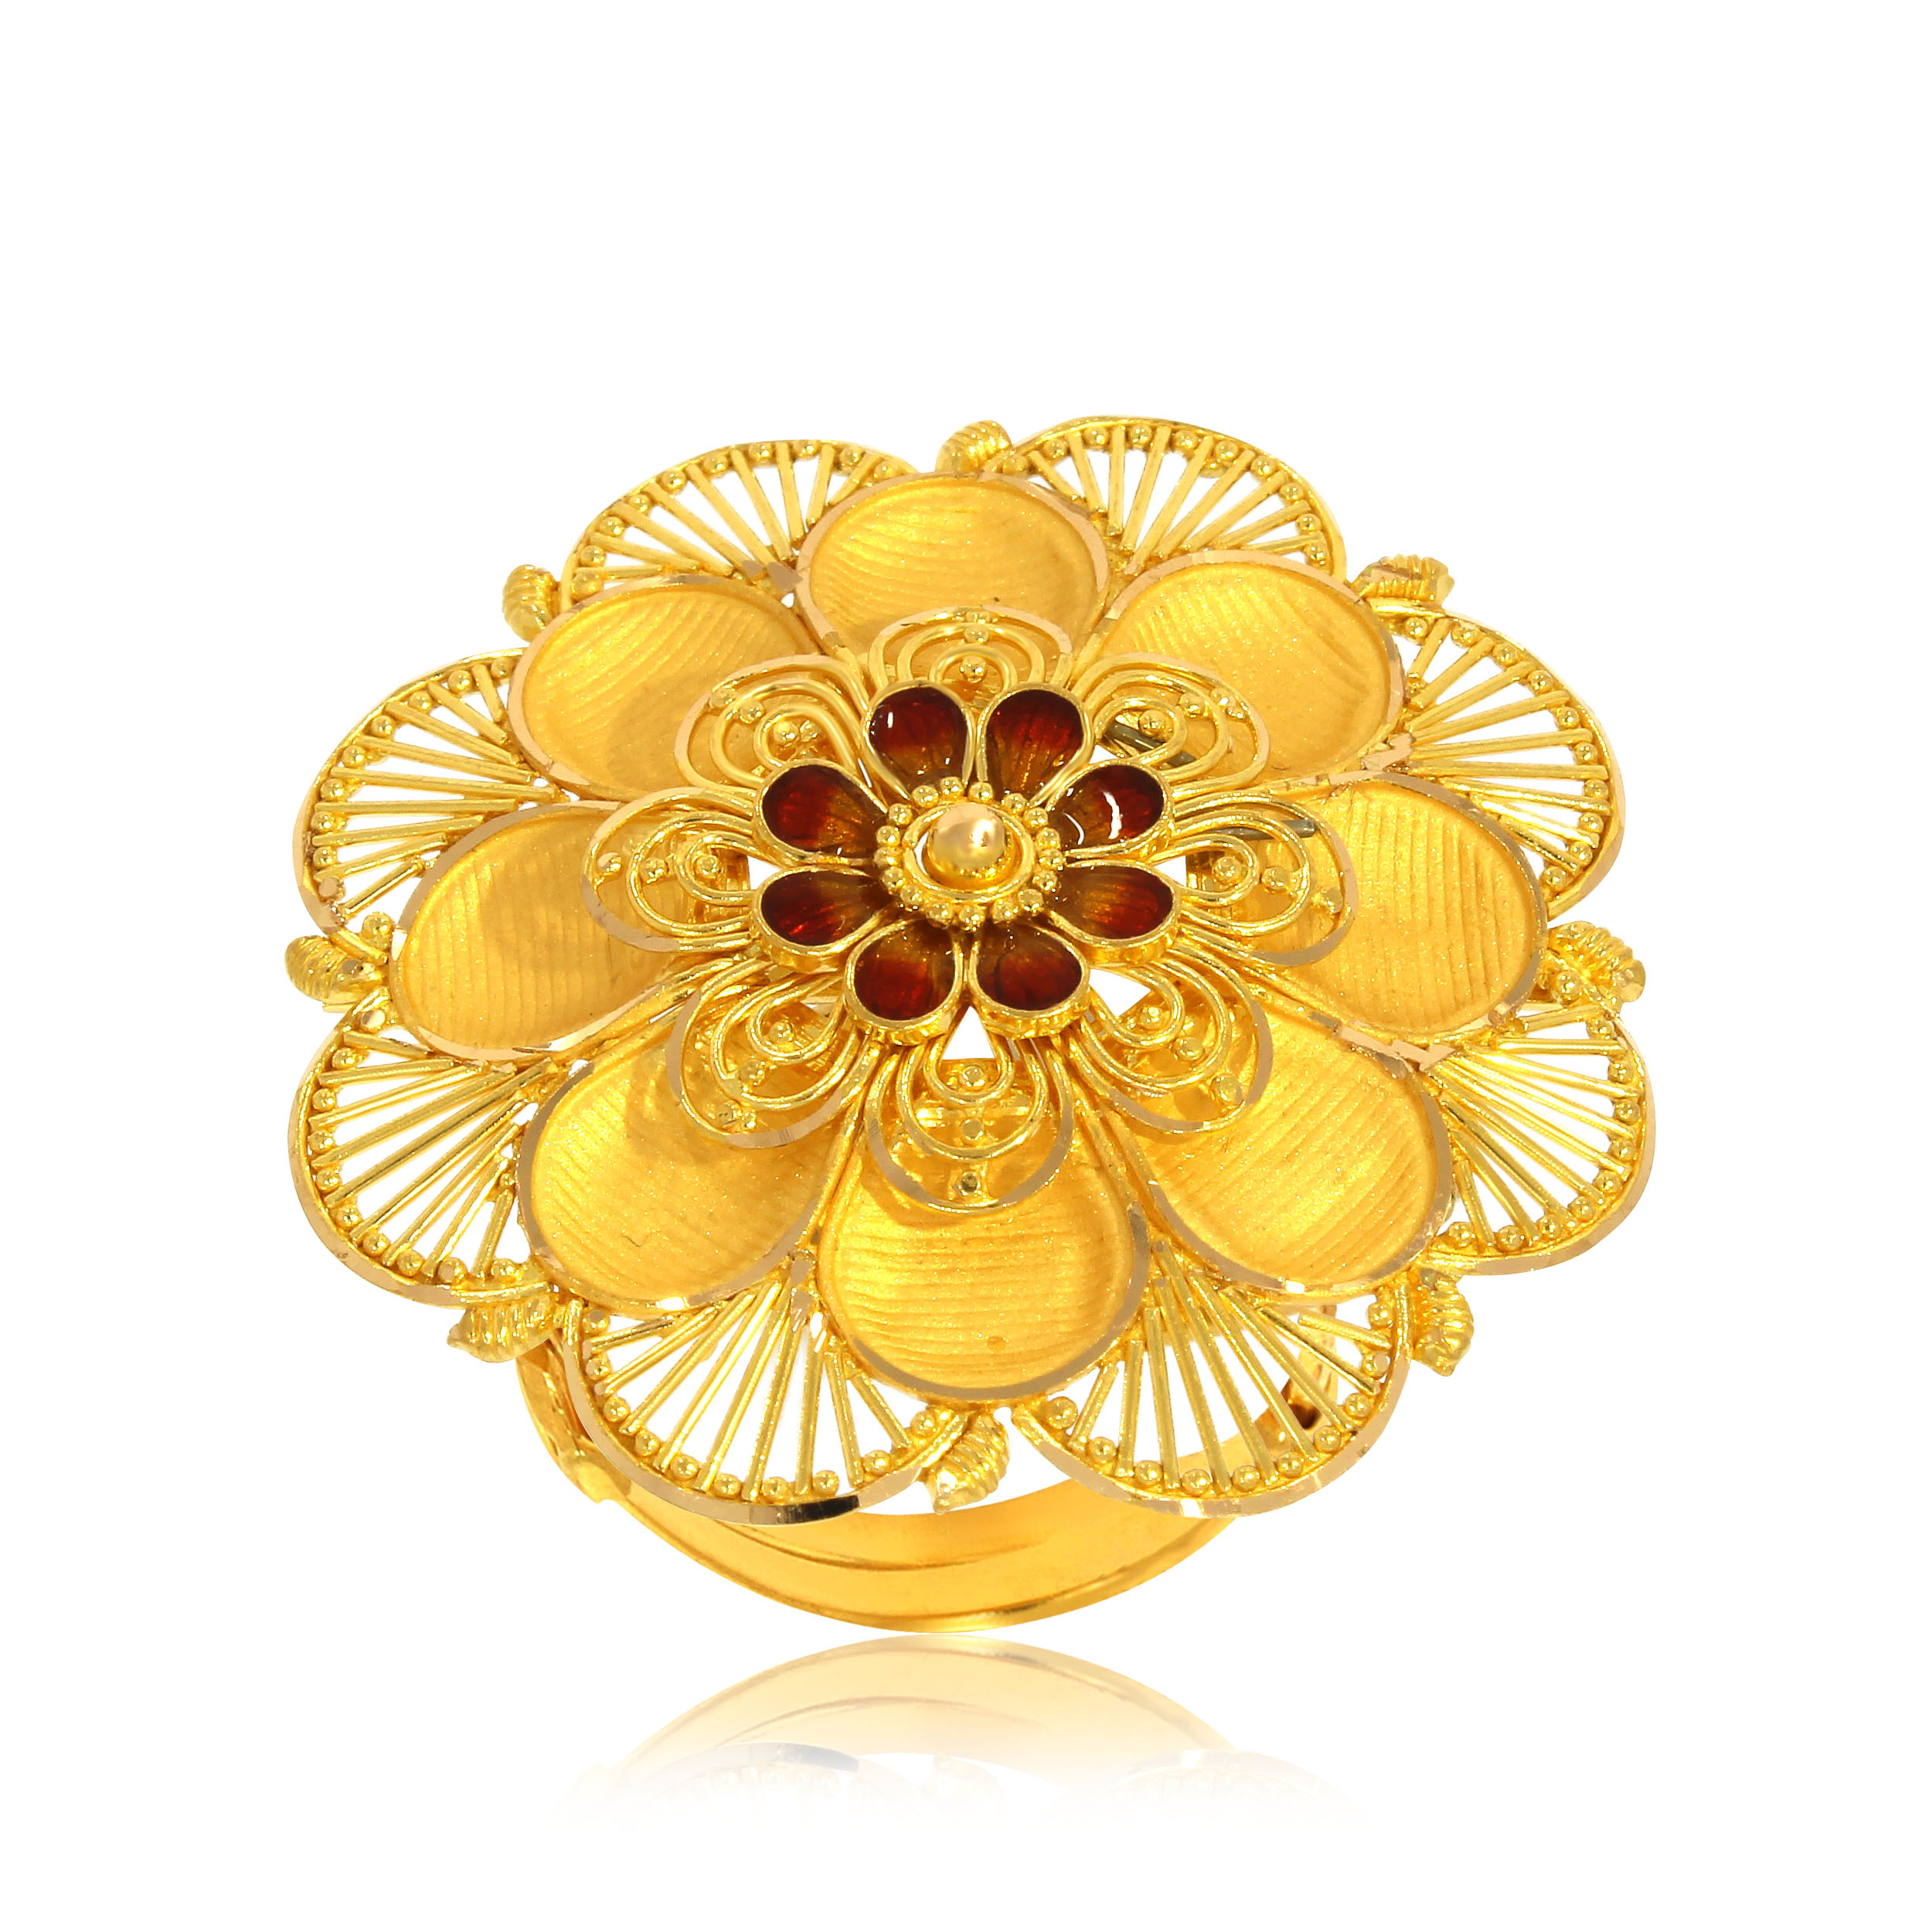 RUPAL AABI JEWELS 22CT  BIS HALLMARK GOLD RING FOR  WOMEN